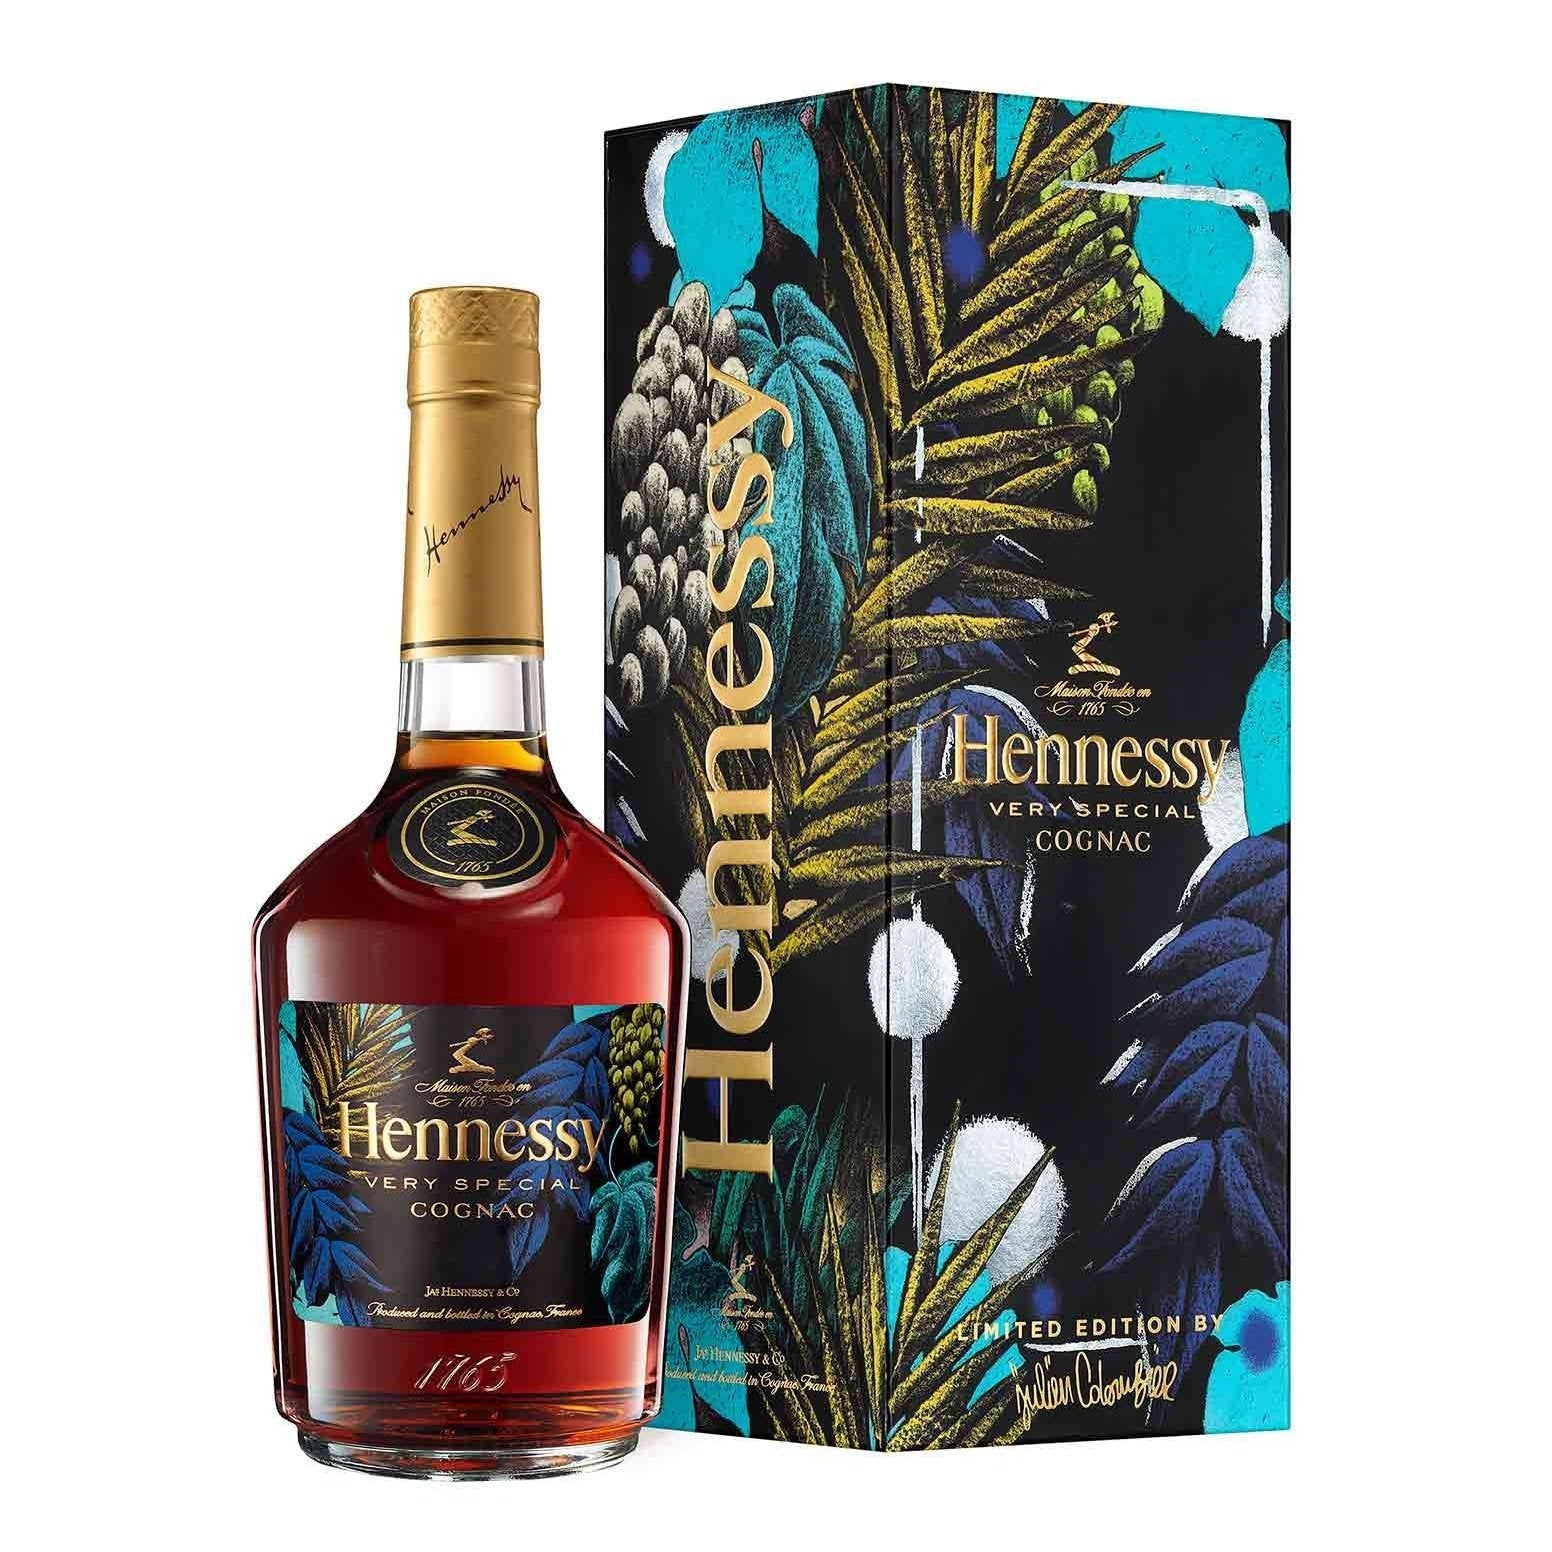 Hennessy  Local Spirit From Cognac, France